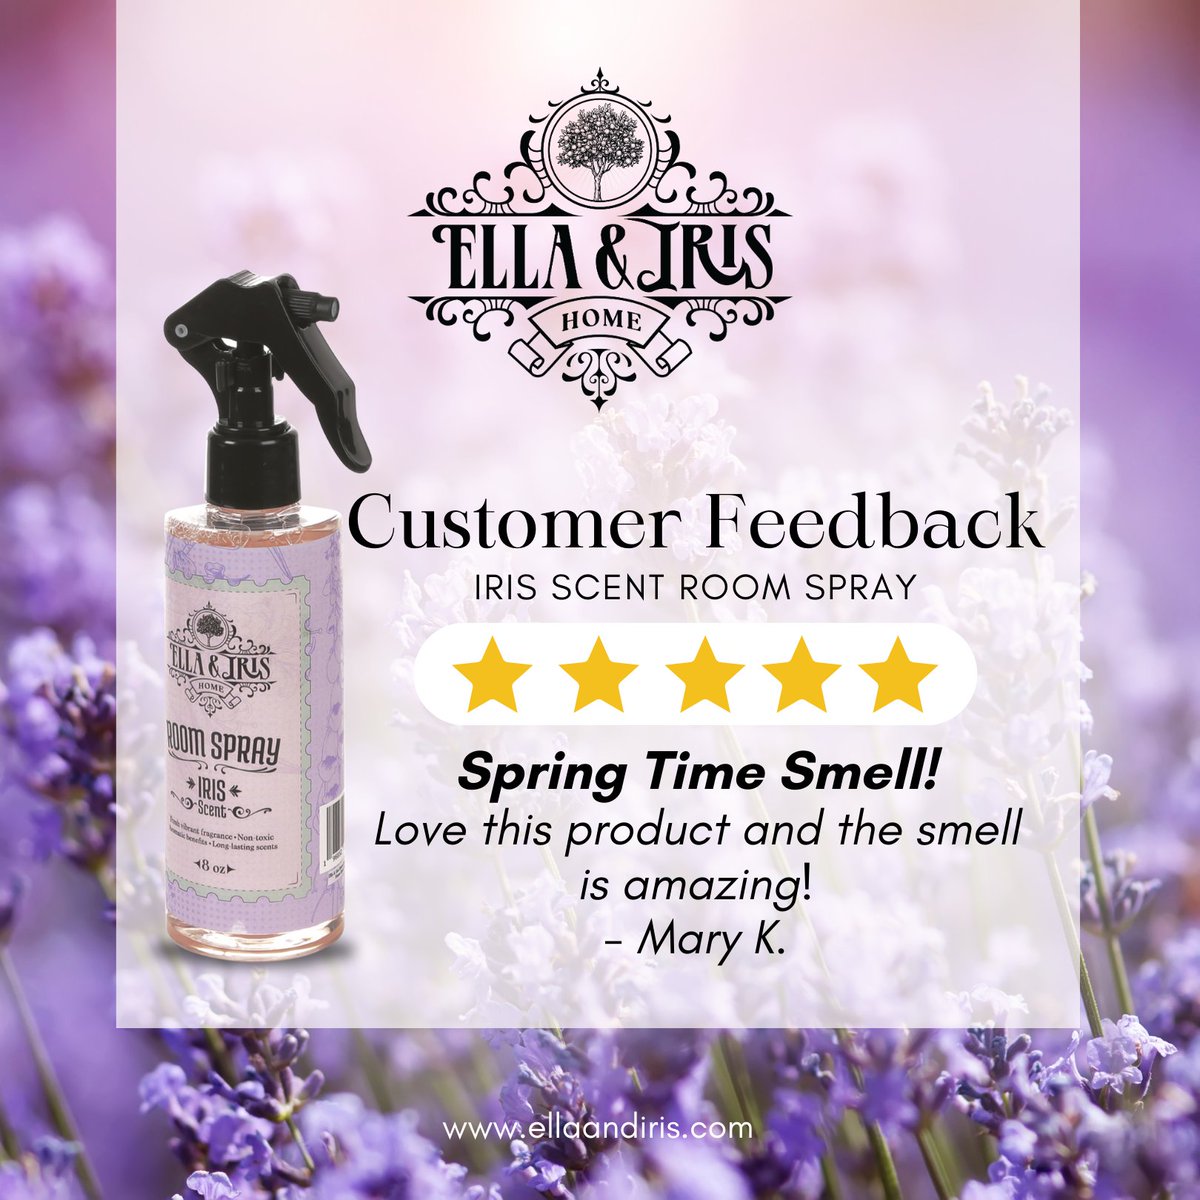 Mary knows the secret to welcoming spring vibes! Her love for our product and the captivating scent is the ultimate #FridayFaves. Thanks for sharing the love for Ella & Iris Home!

#EllaAndIrisHome #HomeFragrance #FridayFaves #CustomerFeedback #ProductReview #RoomSpray